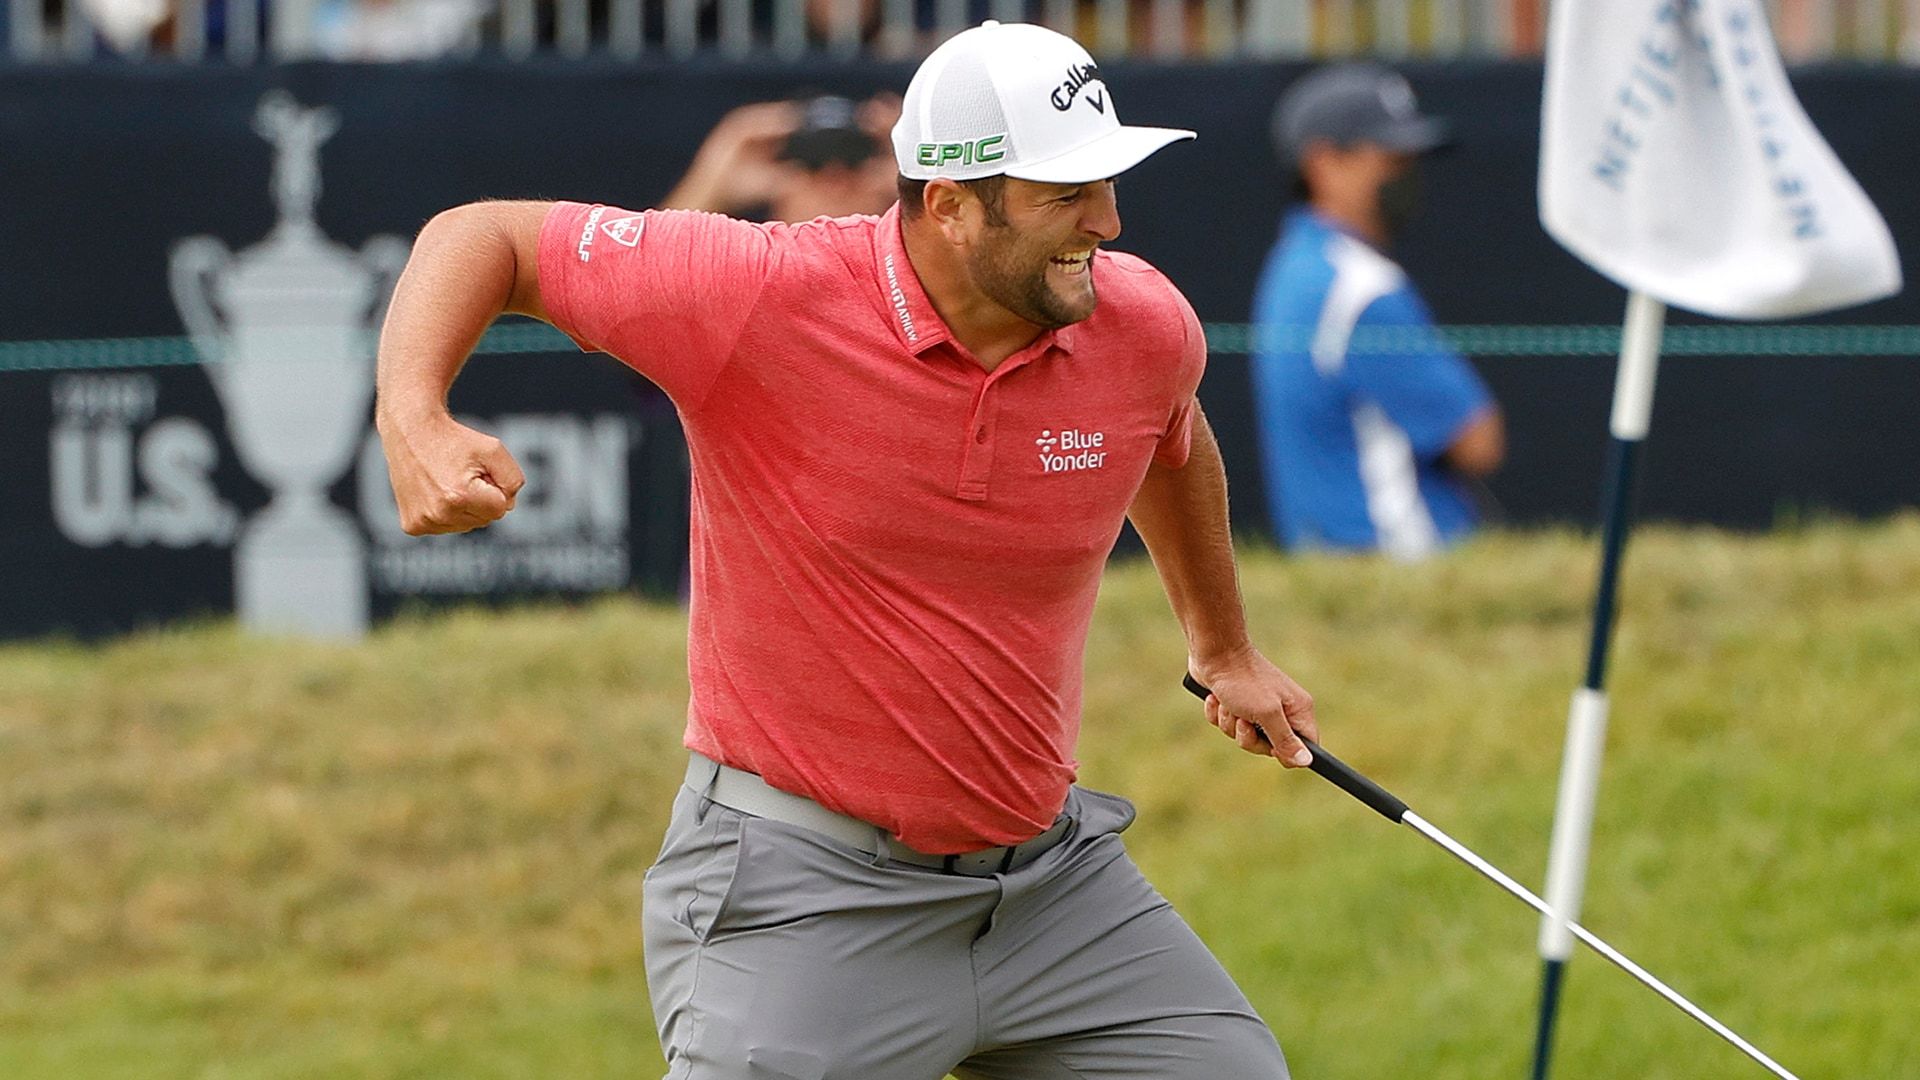 U.S. Open 2021: While many mess up, Jon Rahm clutches up to win U.S. Open at Torrey